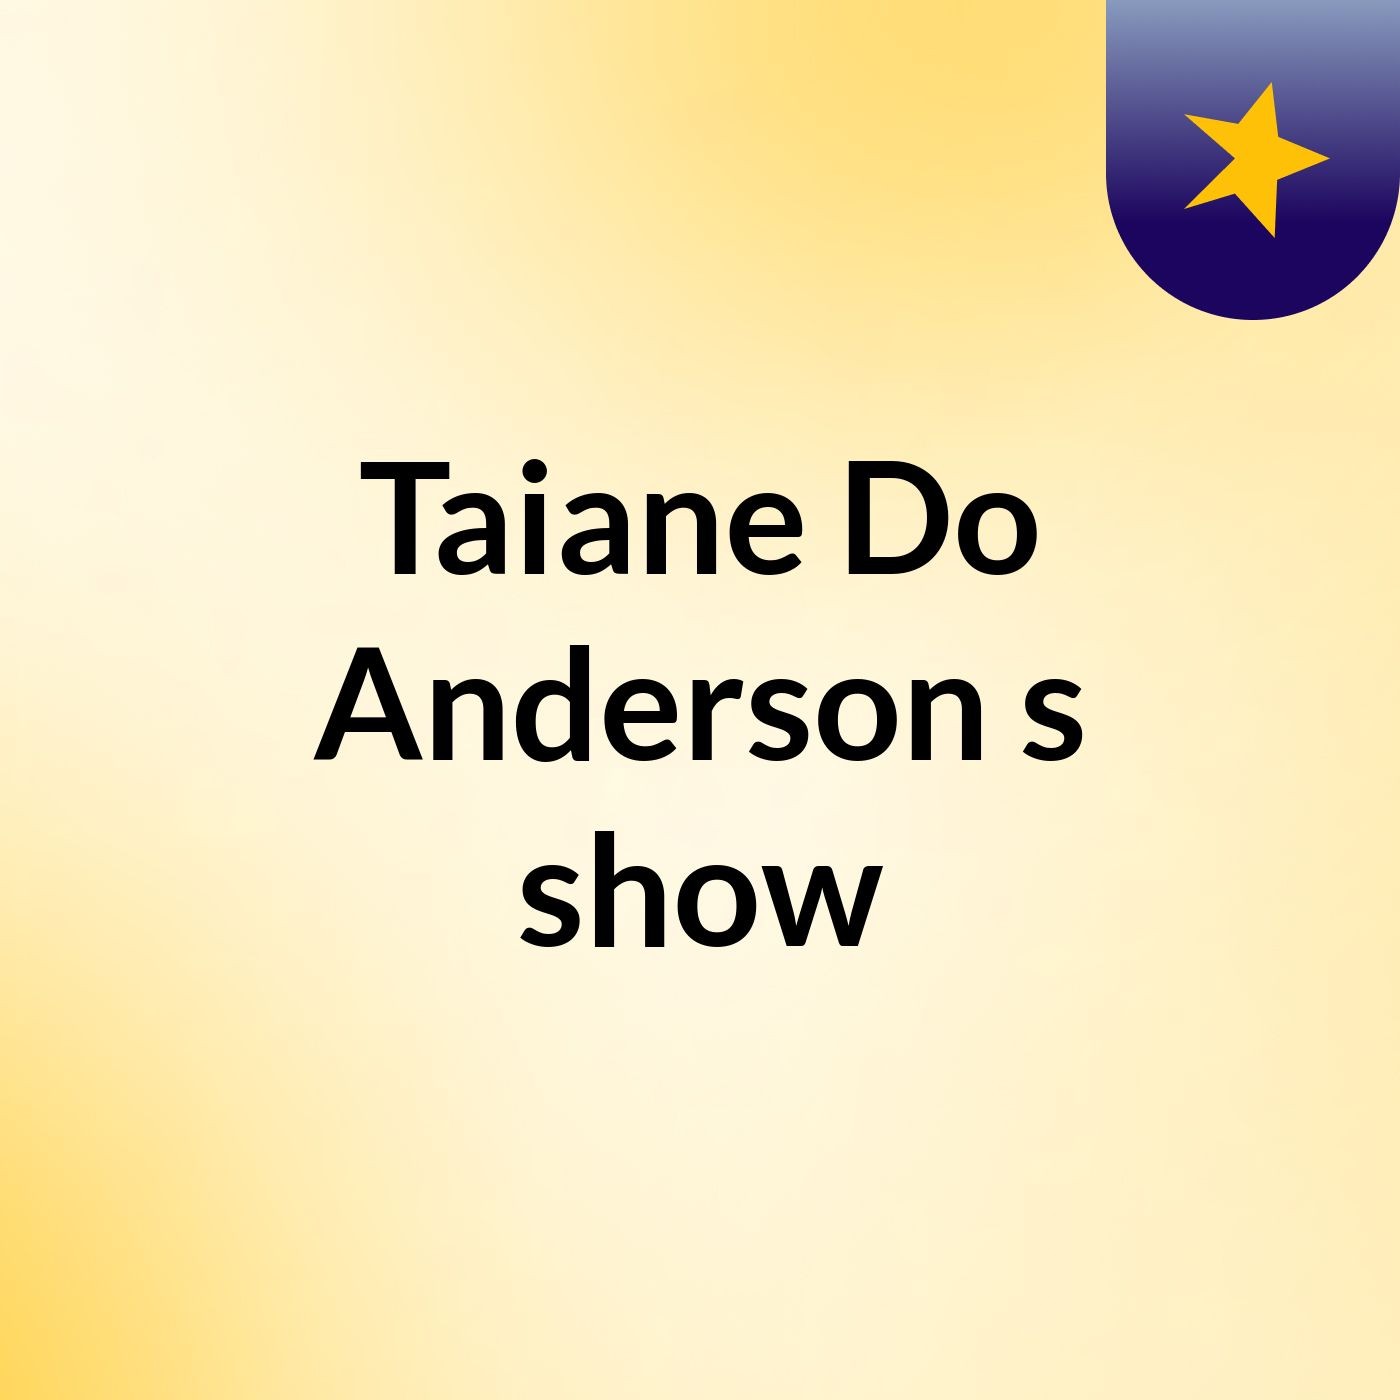 Taiane Do Anderson's show